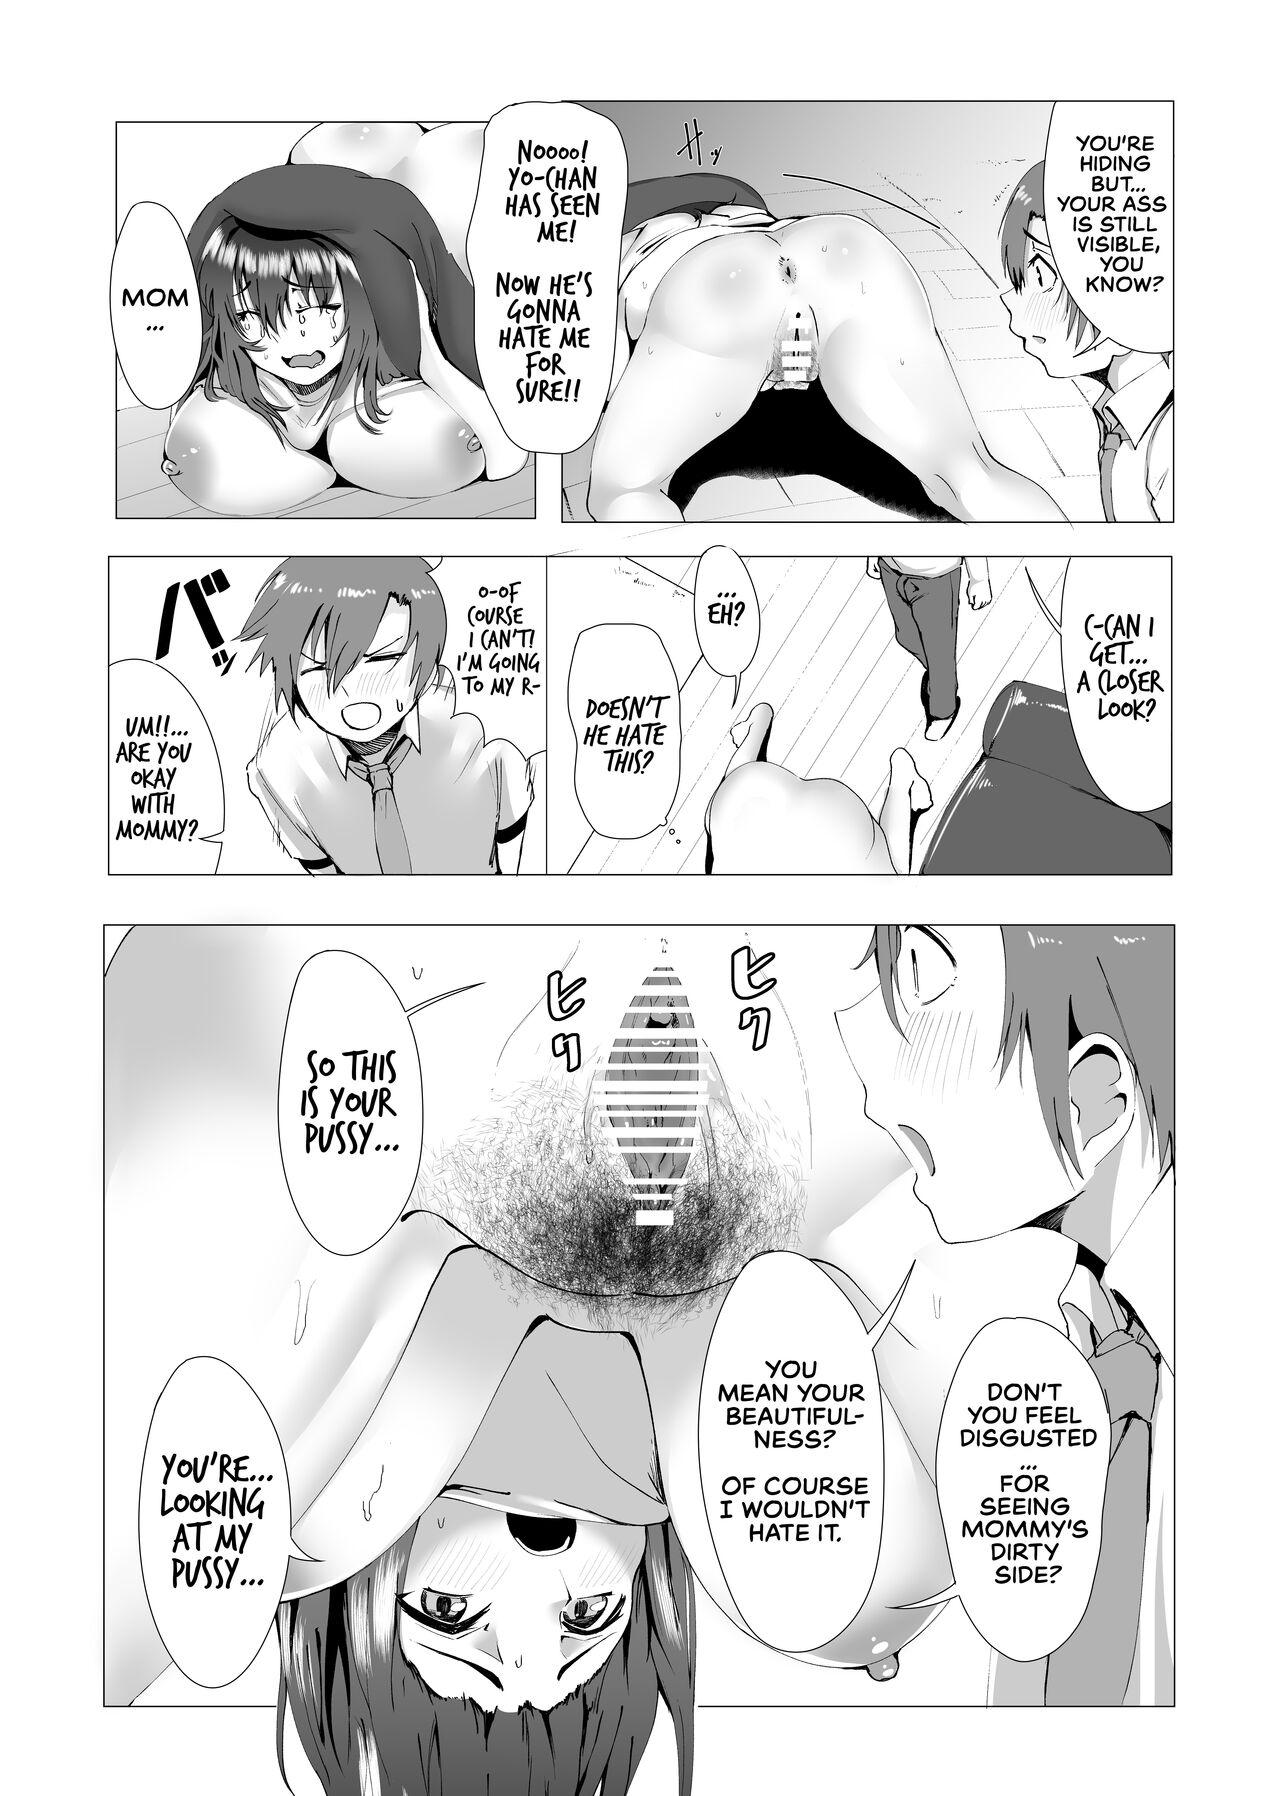 Argentina Hontou ni Mama de Yoi no | Are You Okay With Mommy? - Original Office Fuck - Page 9